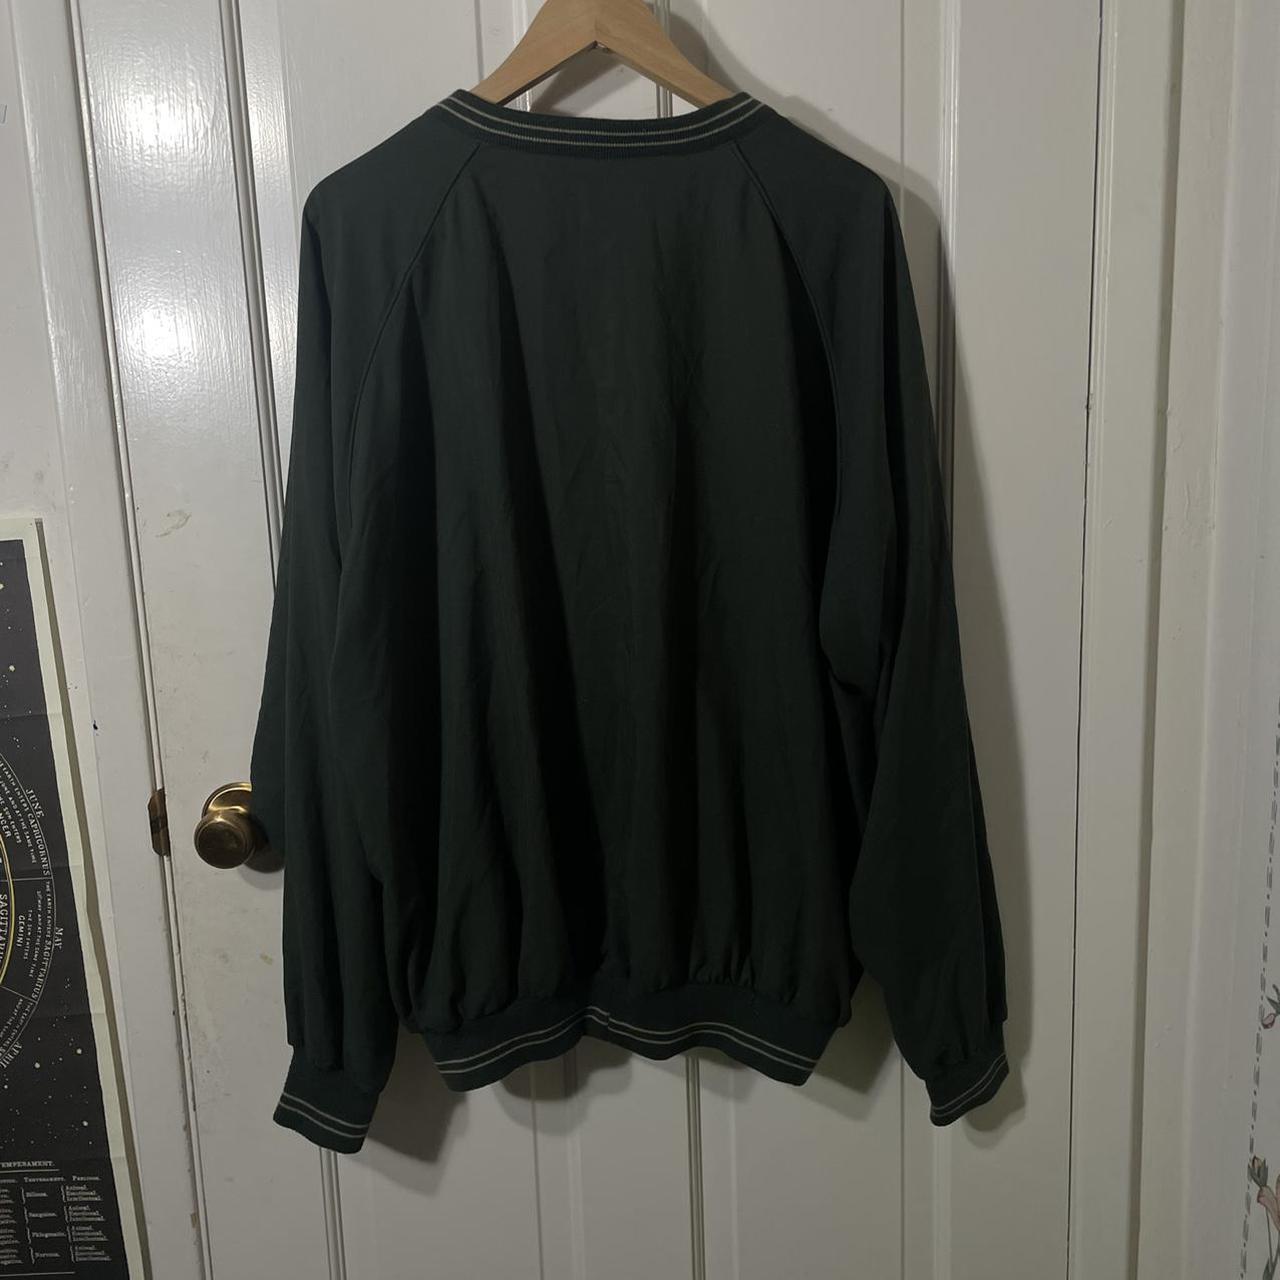 Product Image 4 - vintage pullover ୨୧⊹˖⁺

oversized lightweight wind